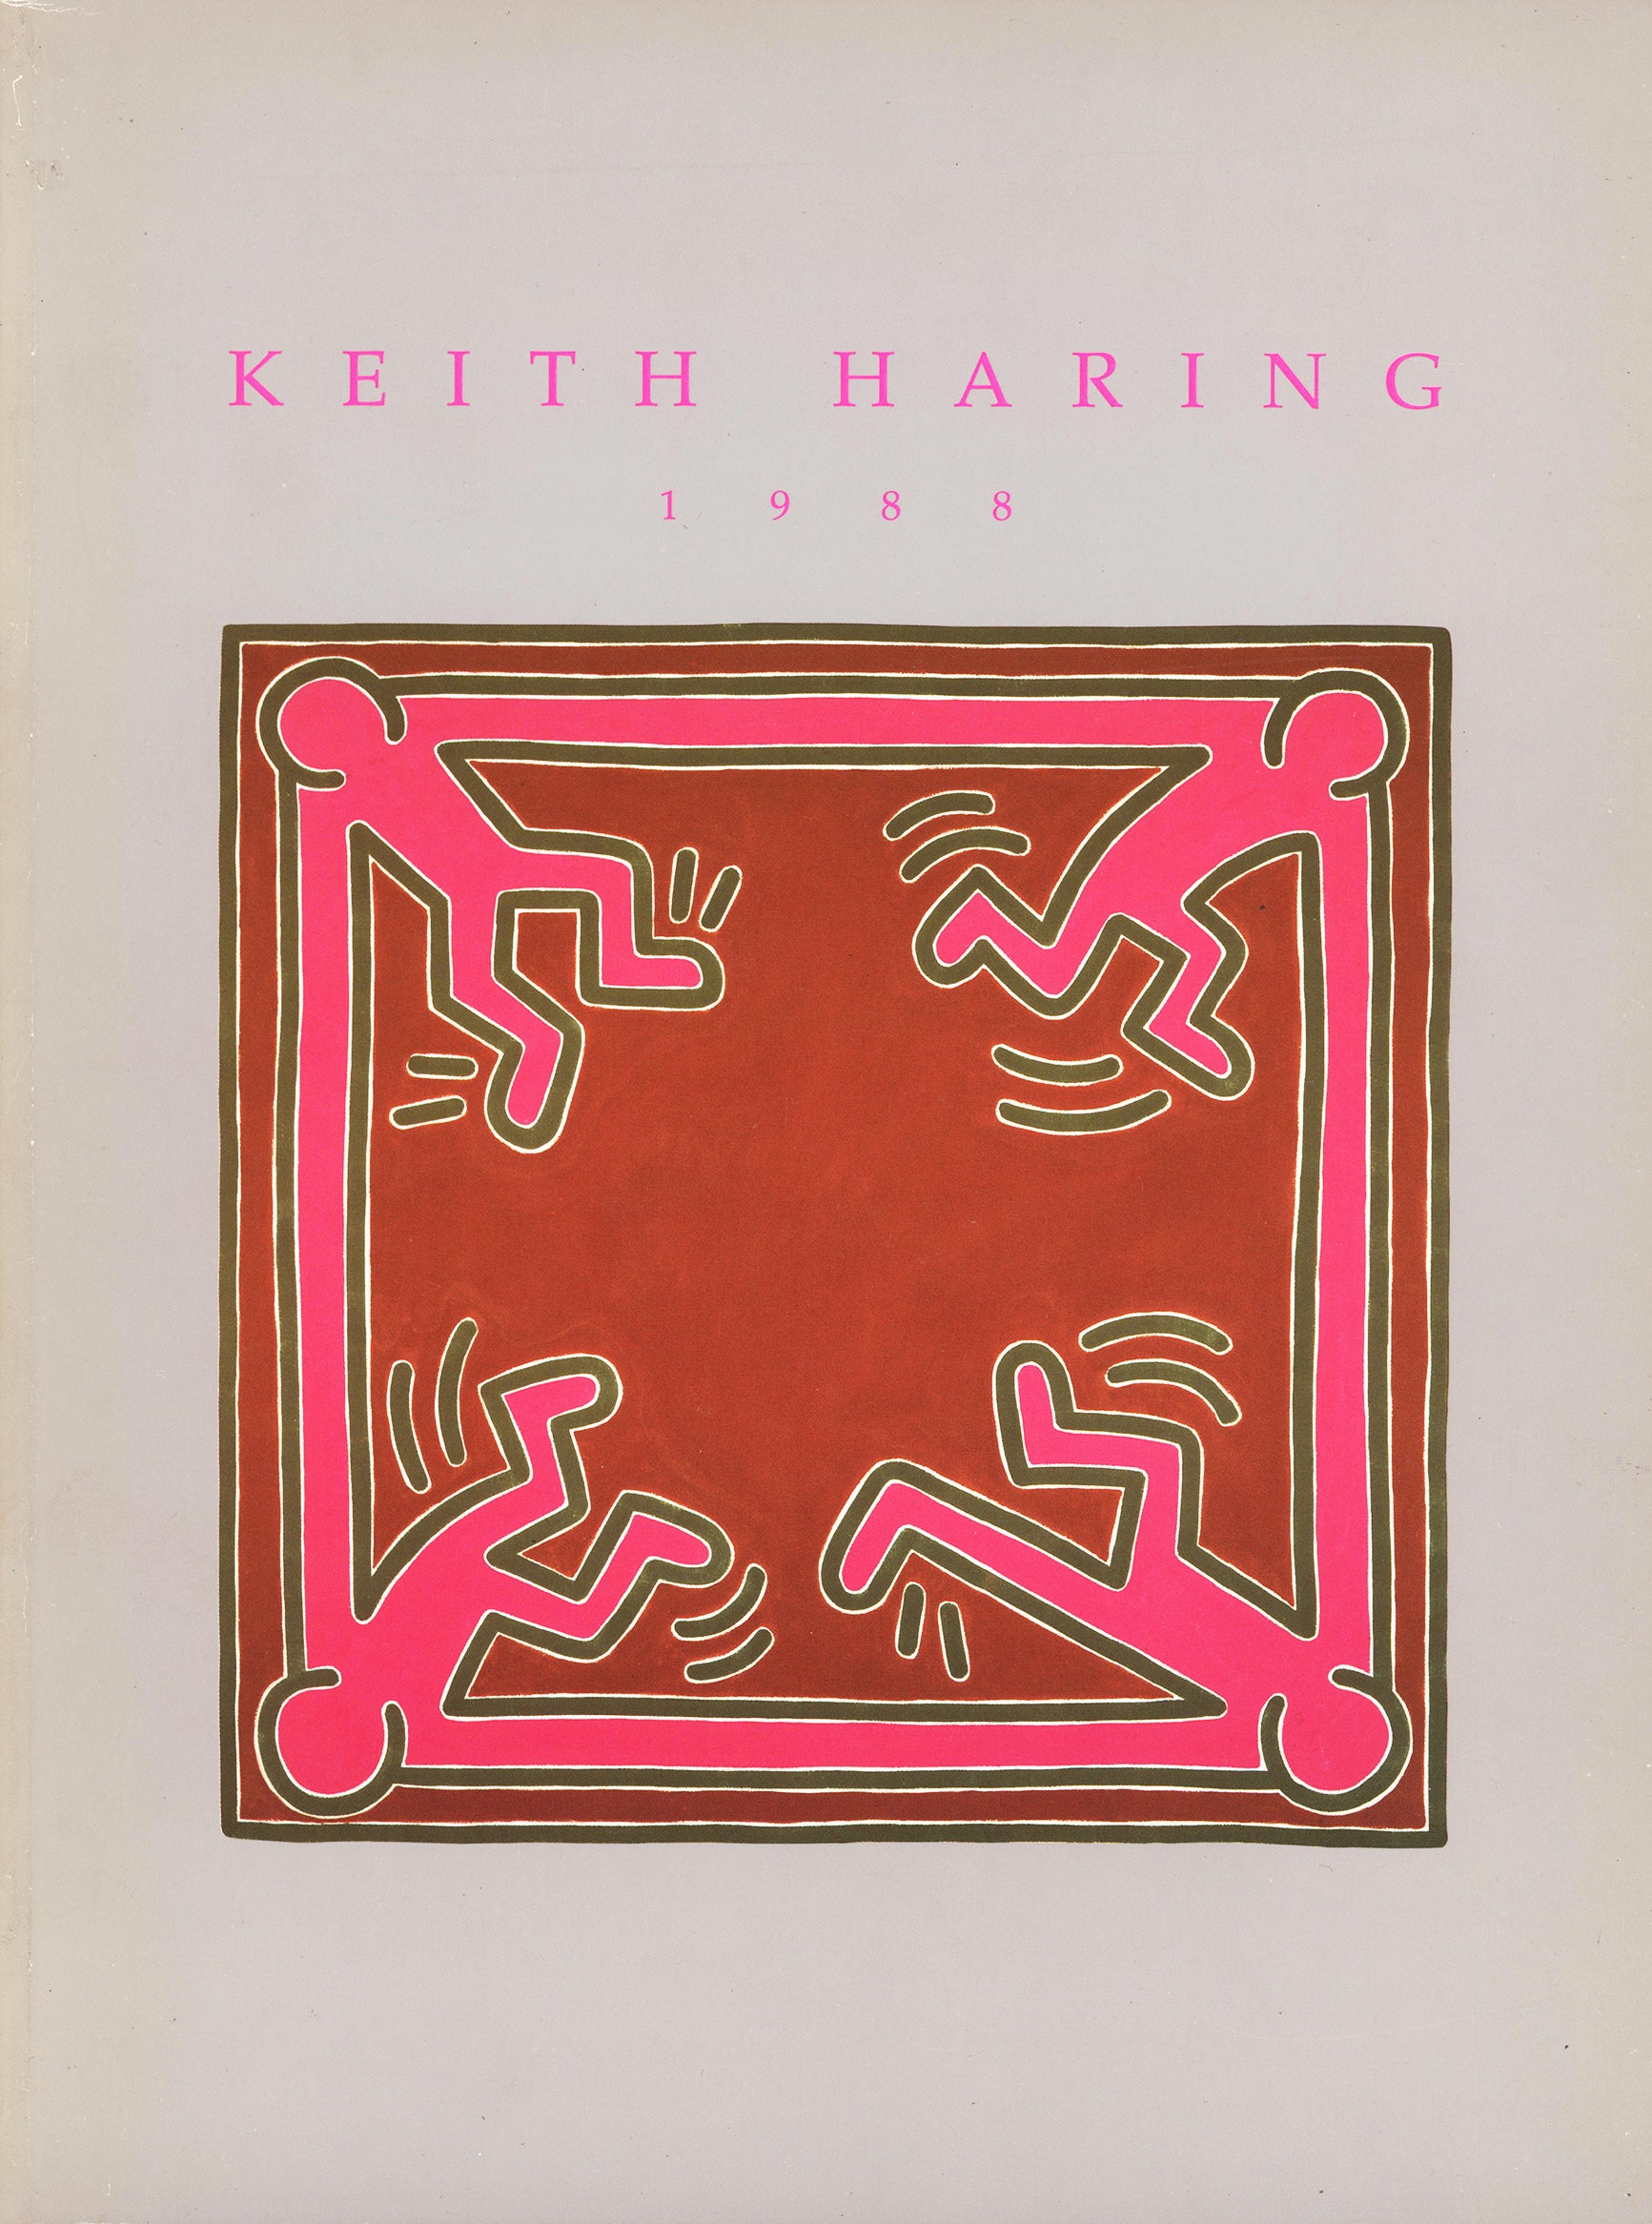 Keith Haring 1988 Martin Lawrence limited editions catalog:
Features 49 color and 19 black and white printed illustrations and also includes an exhibition history and bibliography about Keith Haring. Published in conjunction Michael Kohn gallery